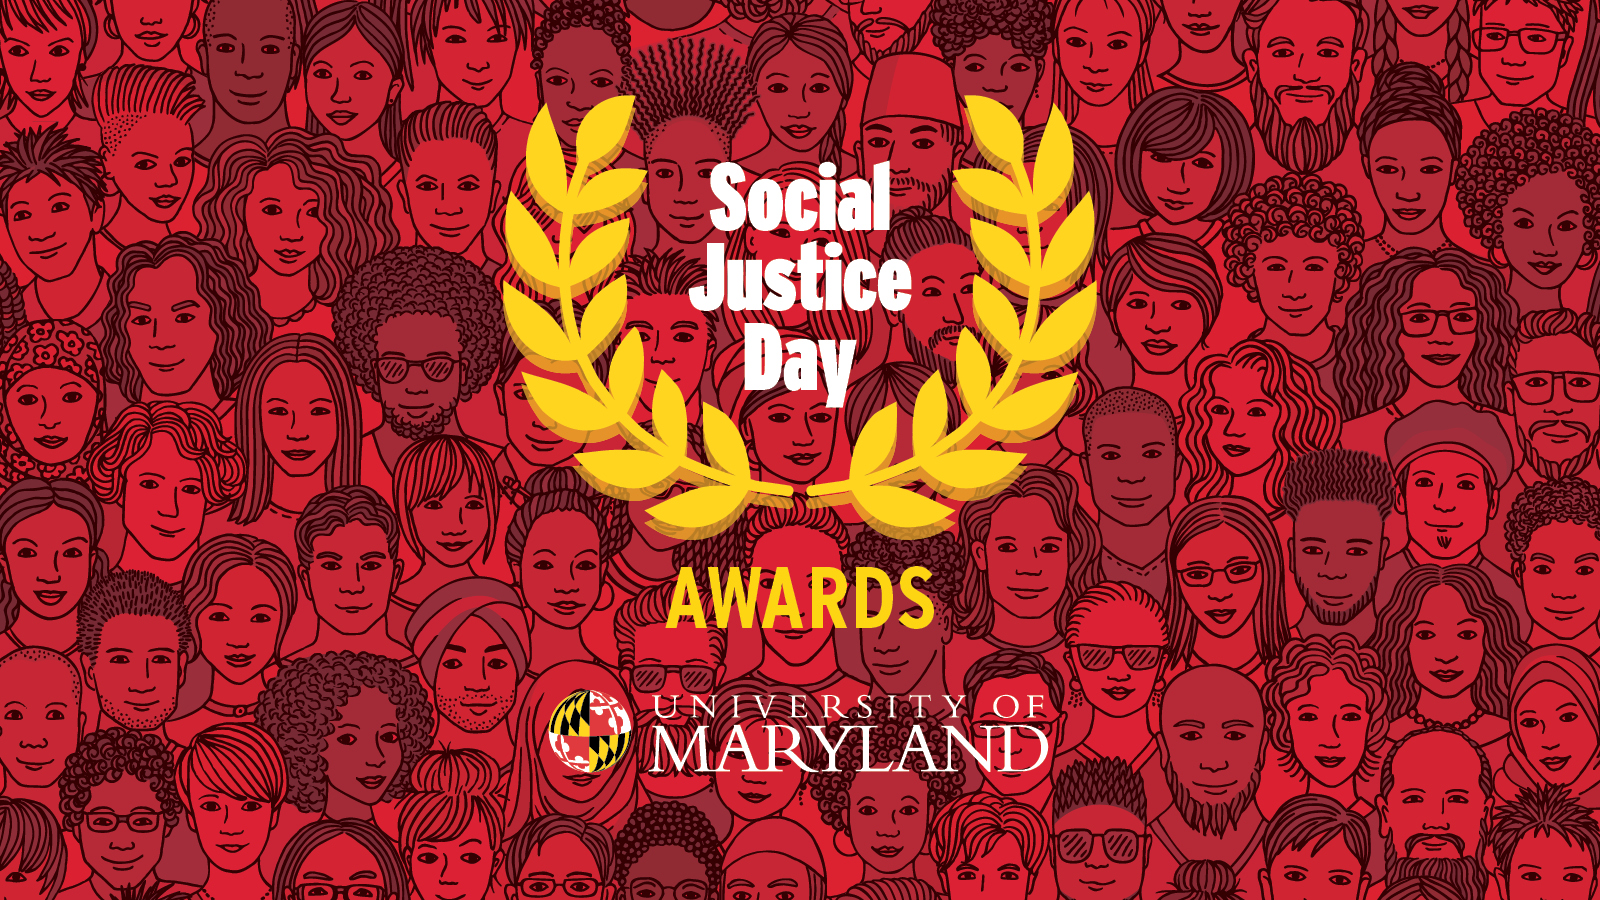 Social Justice Day 2019 Awards Inset